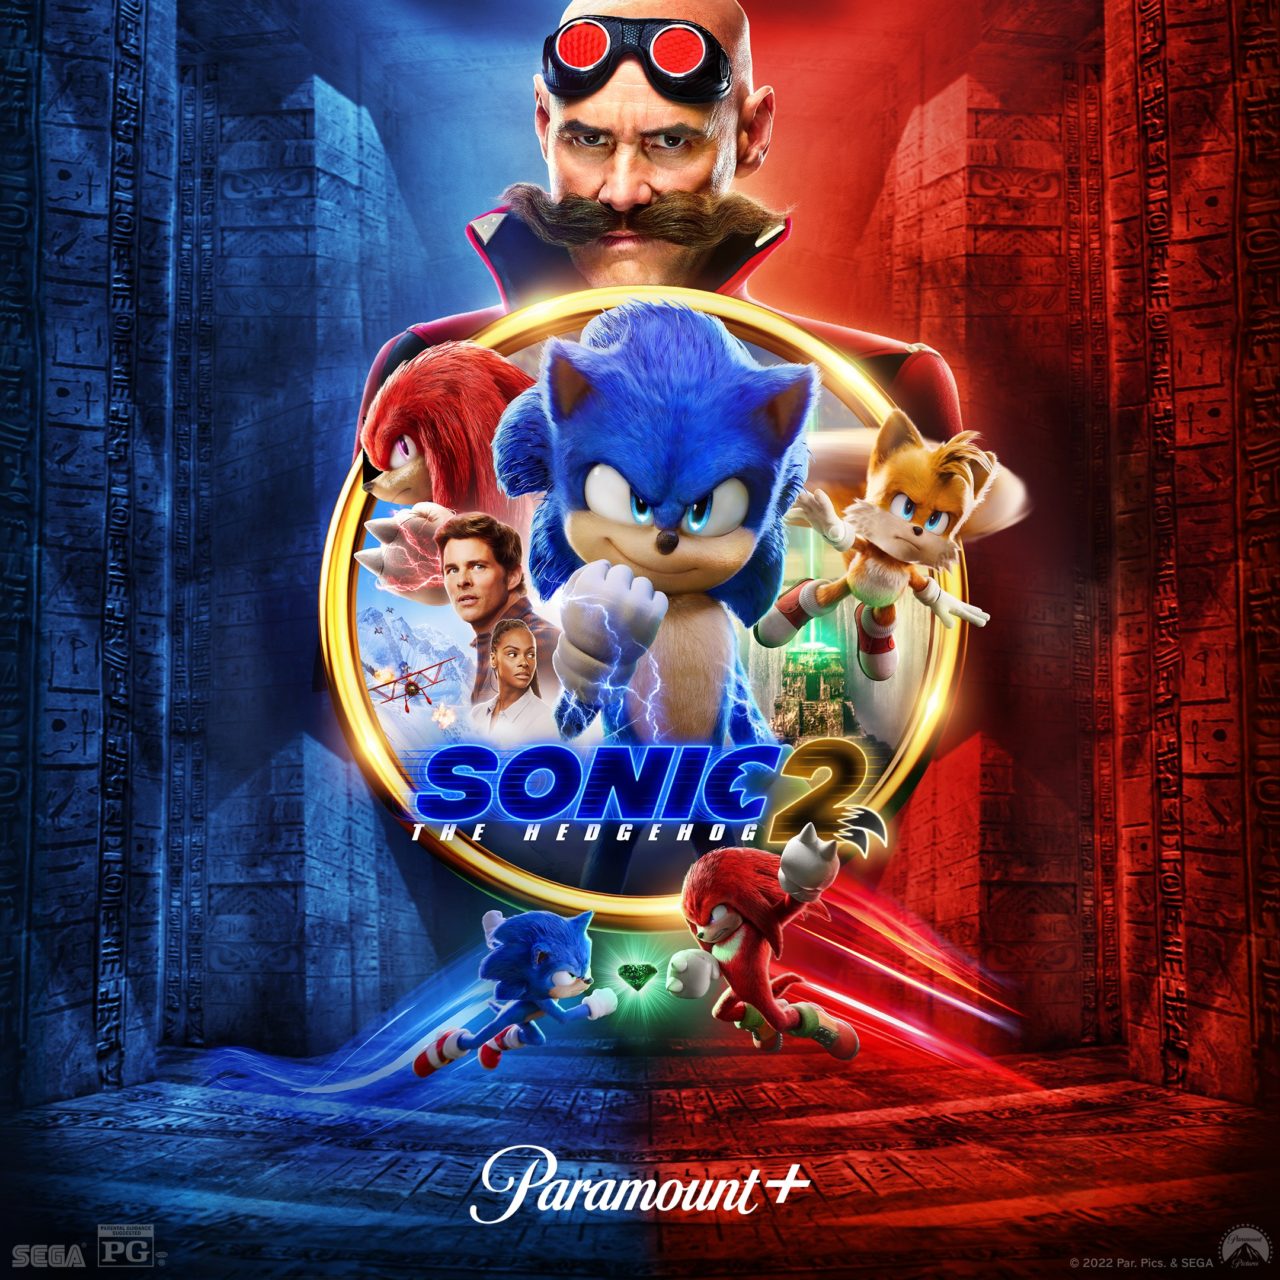 Sonic The Hedgehog 2 graphic (Paramount+)